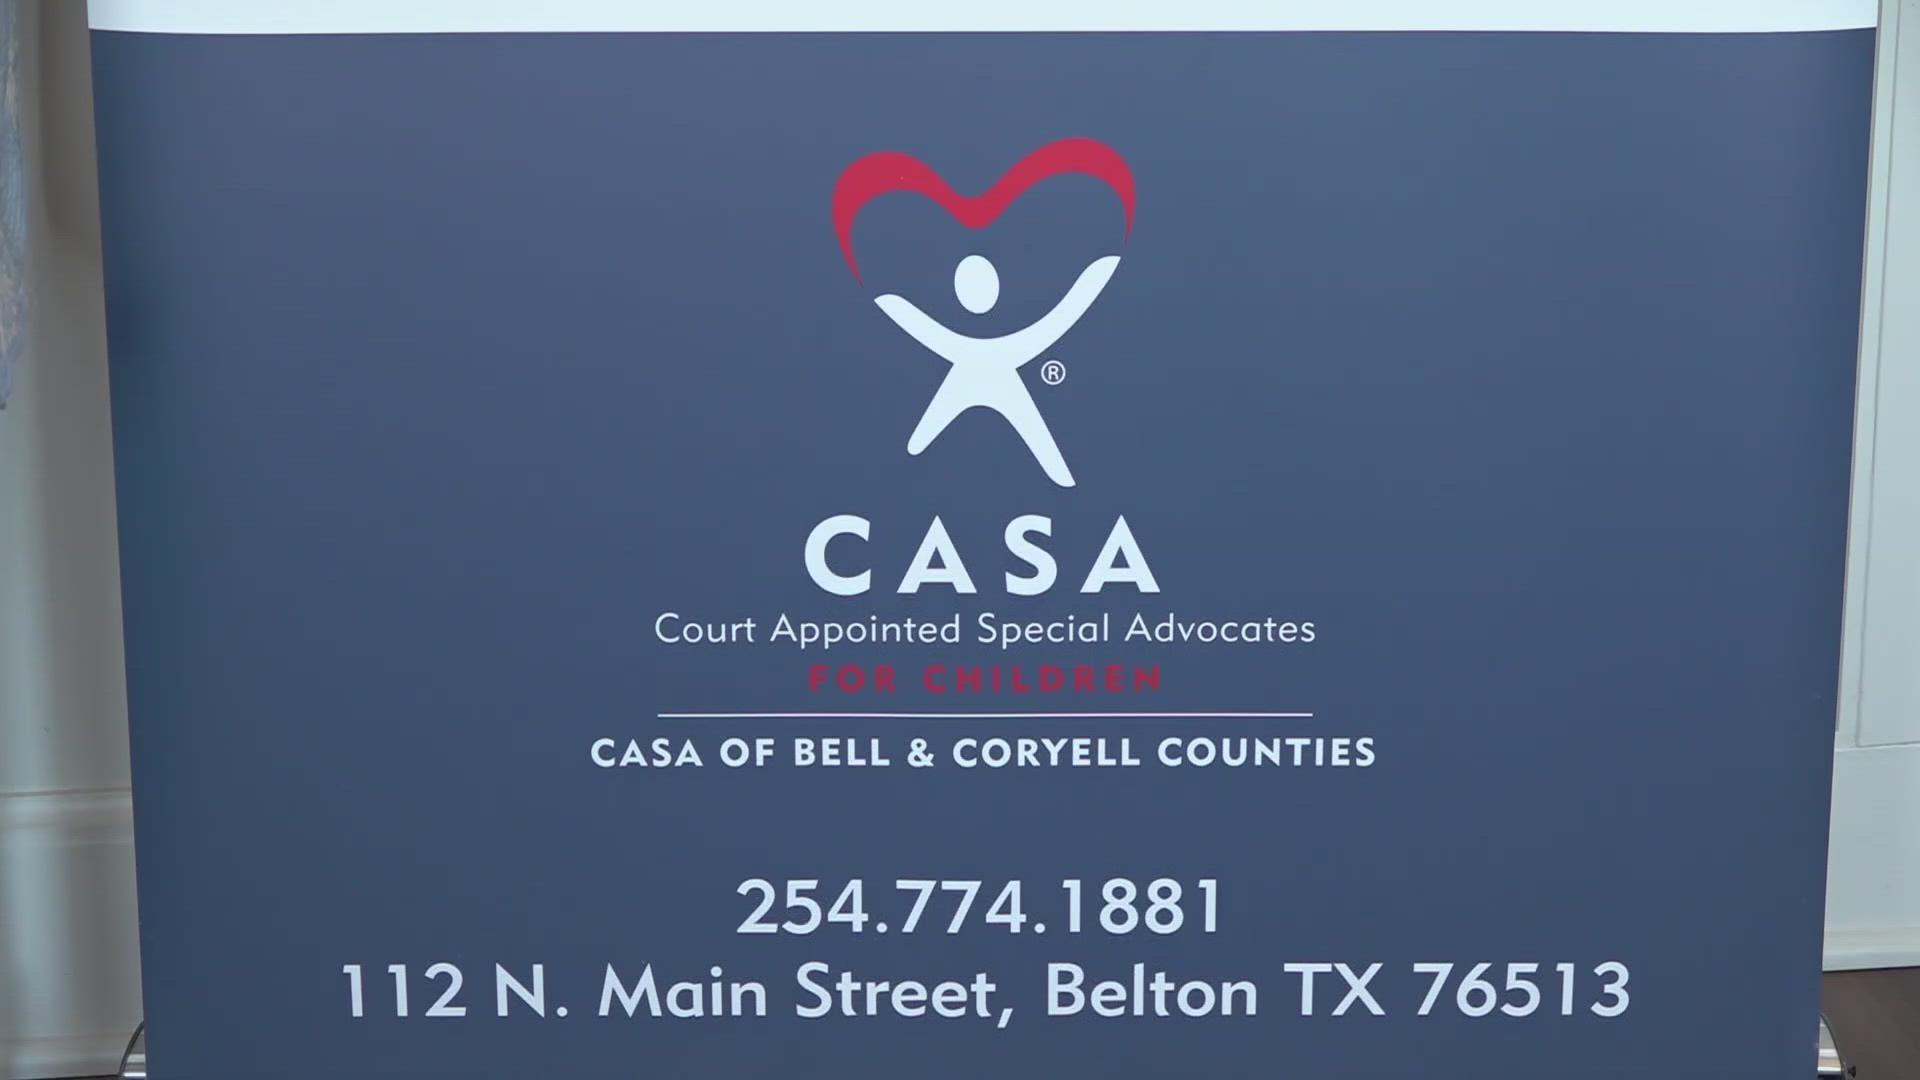 Court Appointed Special Advocates, or CASA, like Beverly Ledbetter, are helping foster children around Central Texas.